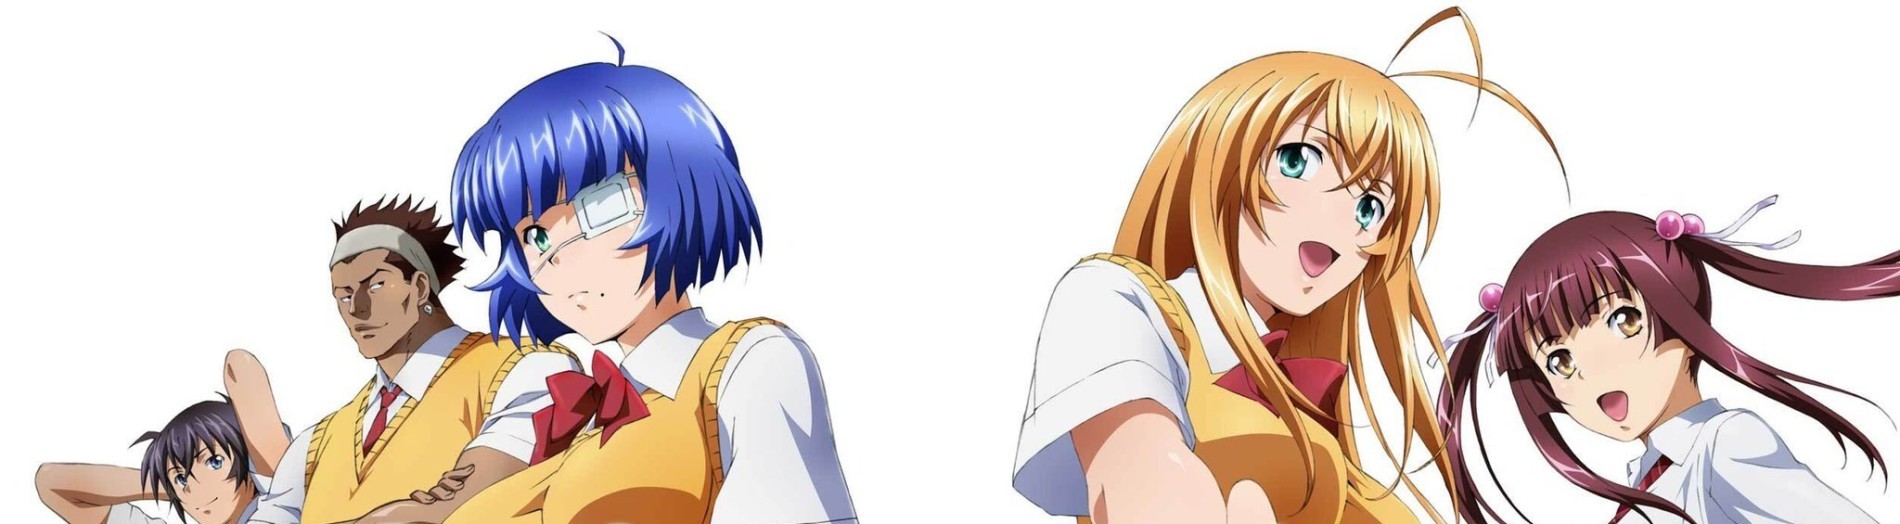 Shin Ikki Tousen to Premiere on May 17, New Trailer and Visual